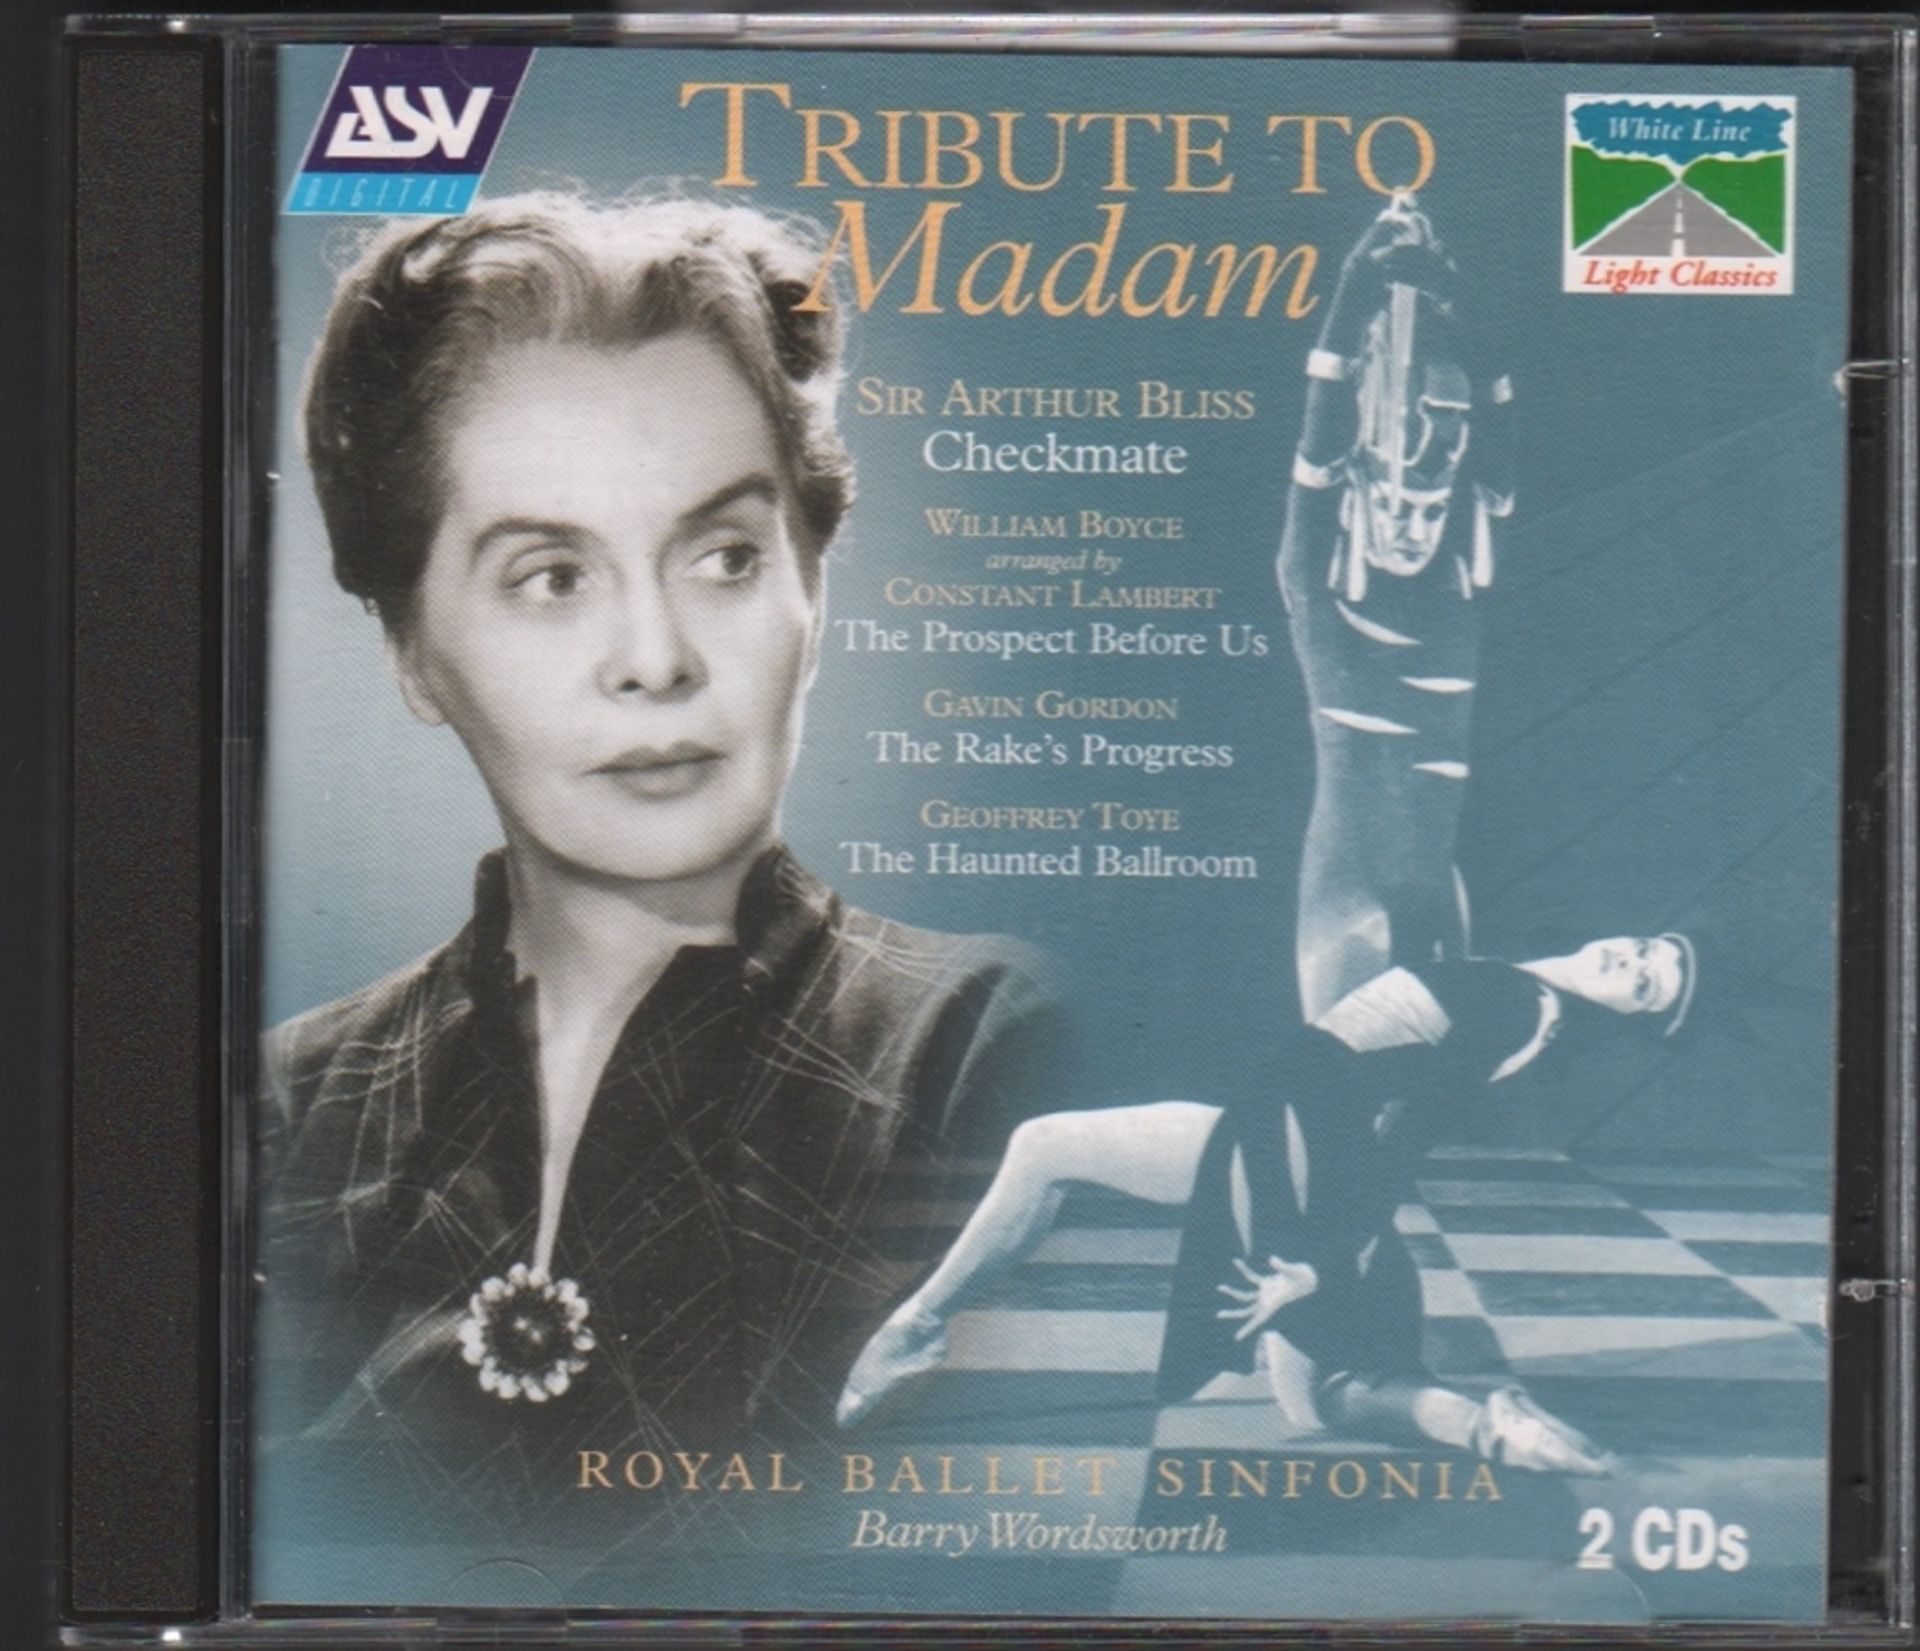 CD. Tribute to Madam. Sir Arthur Bliss Checkmate. William Boyce / C. Lambert The prospect before us.